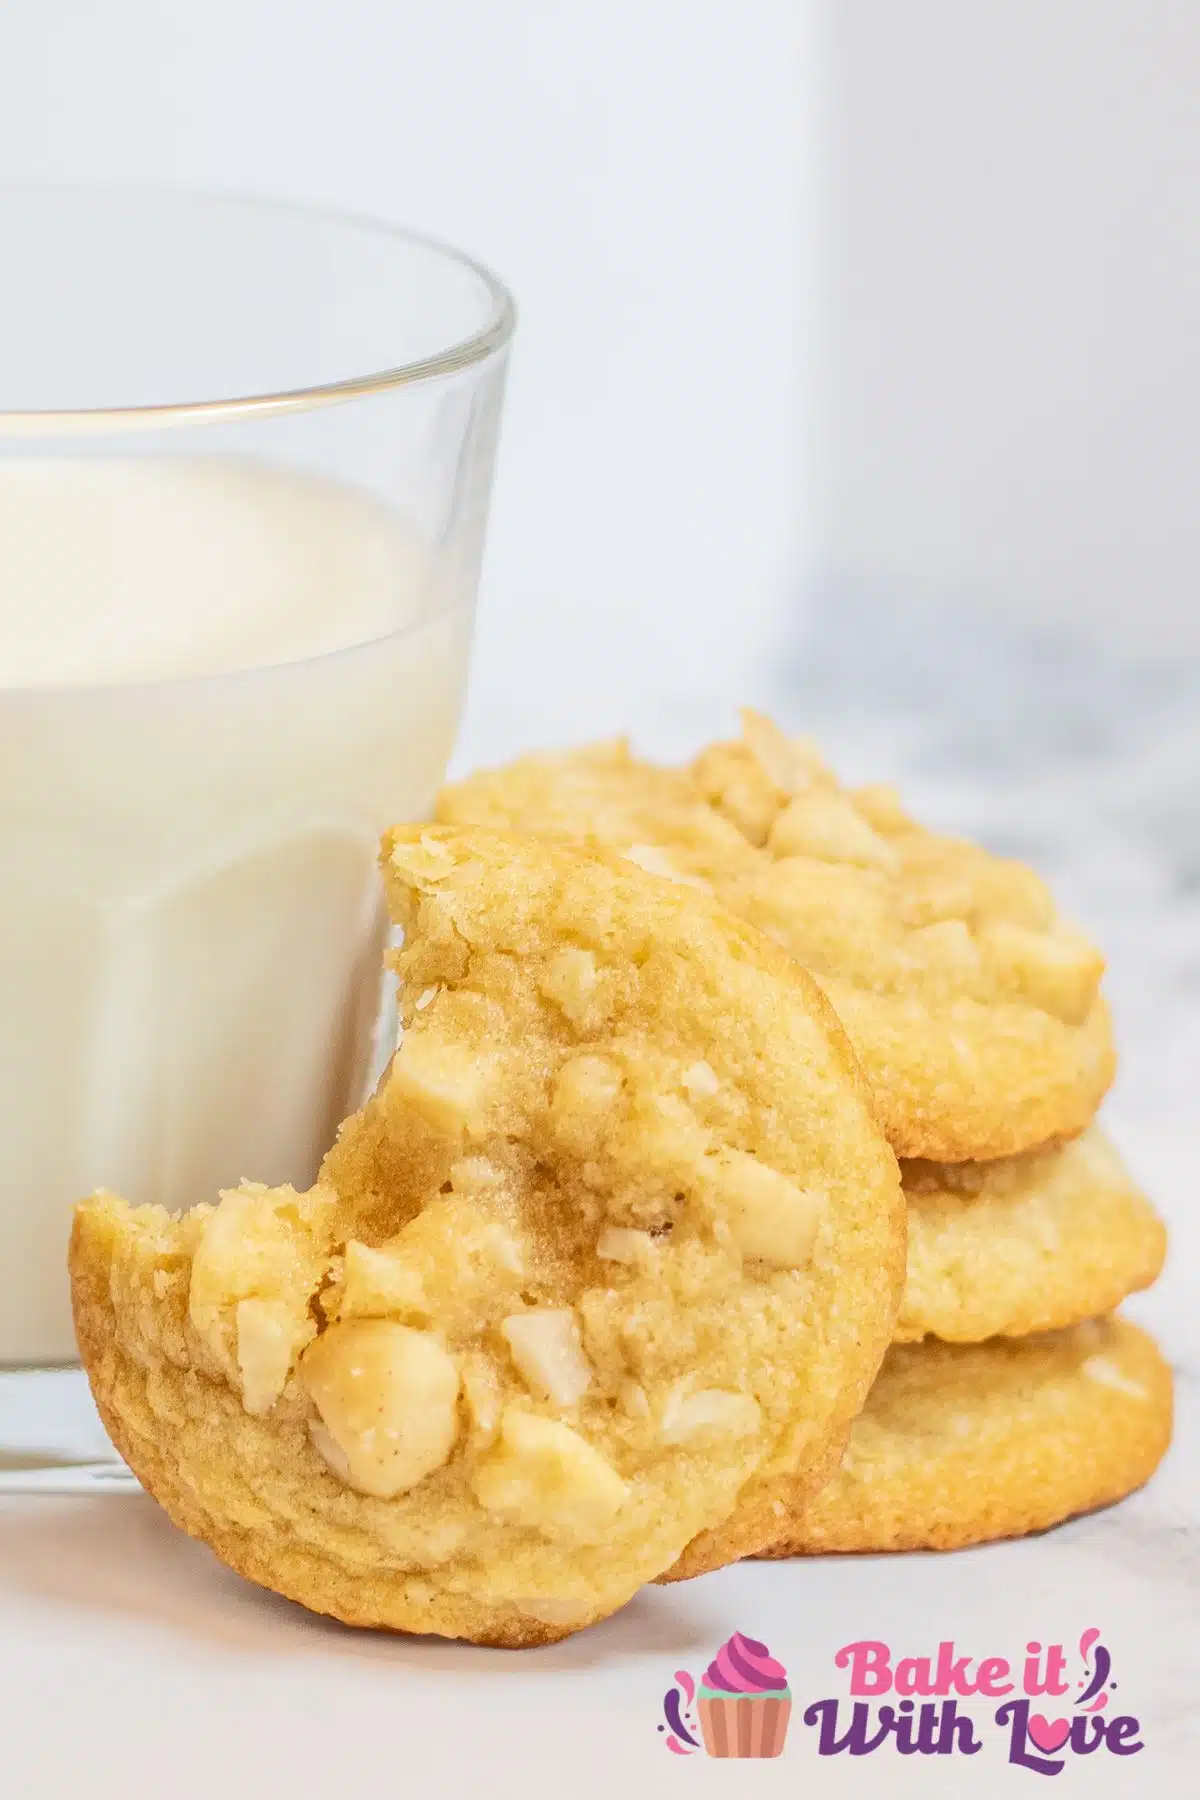 Easy macadamia nut cookies are a classic hit especially when served with a cold glass of milk.